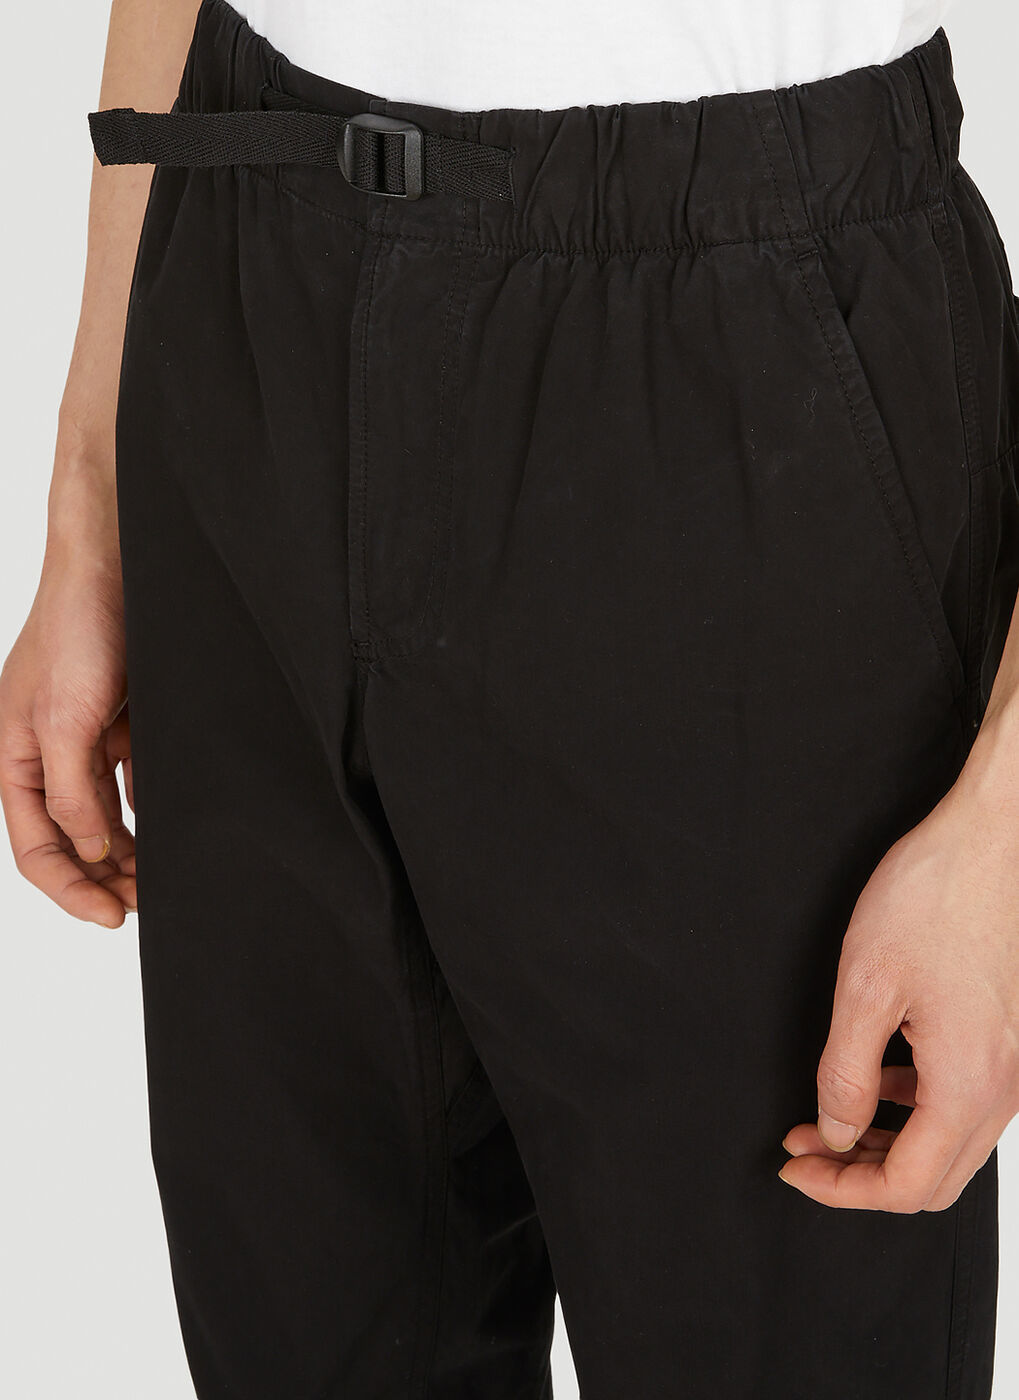 Youri Climber Pants in Black A.P.C.